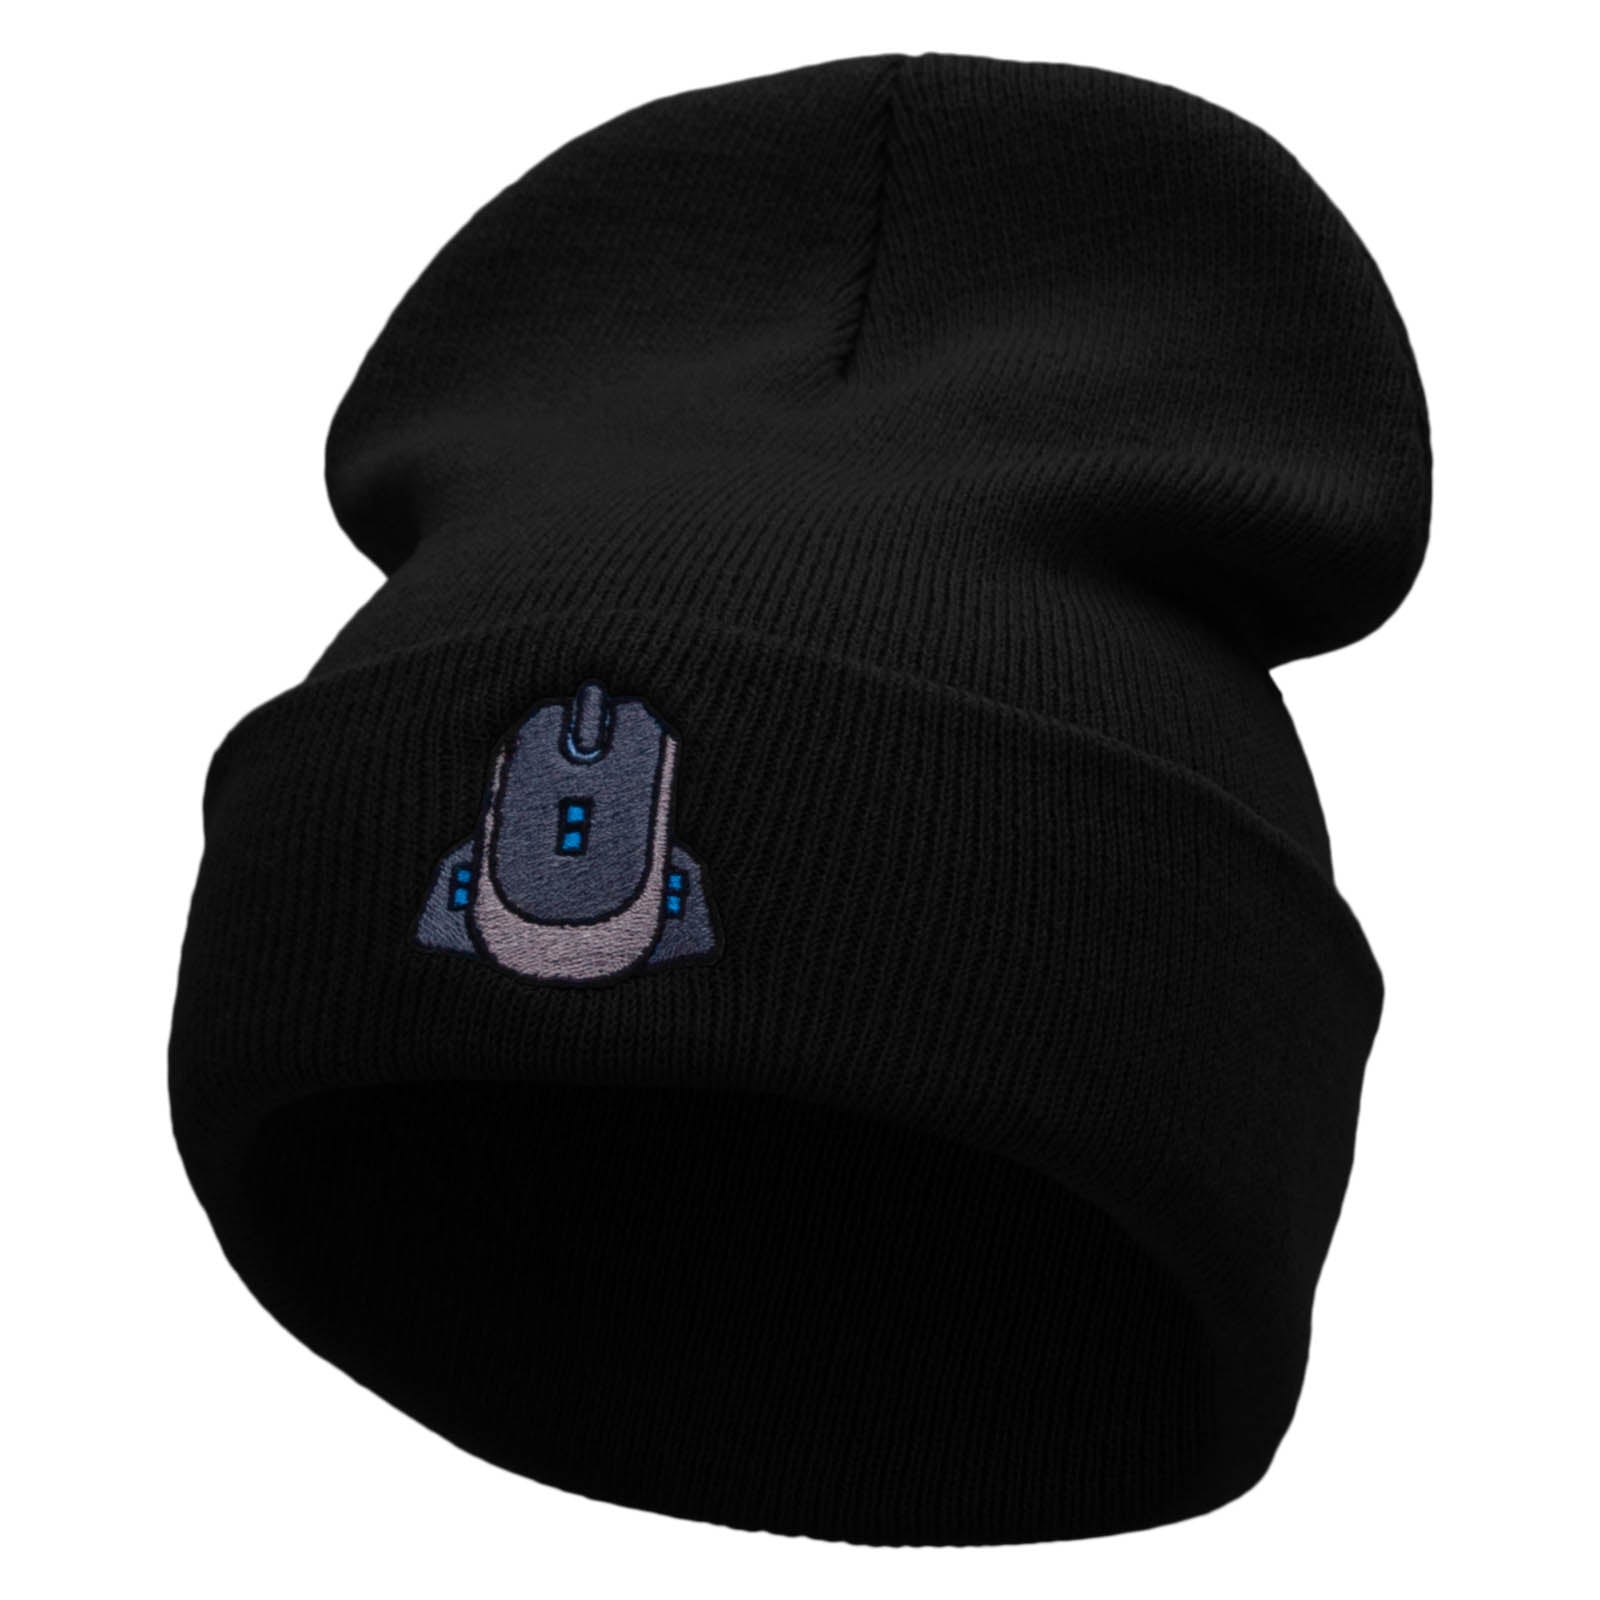 Gamer Mouse Embroidered 12 Inch Long Knitted Beanie - Black OSFM